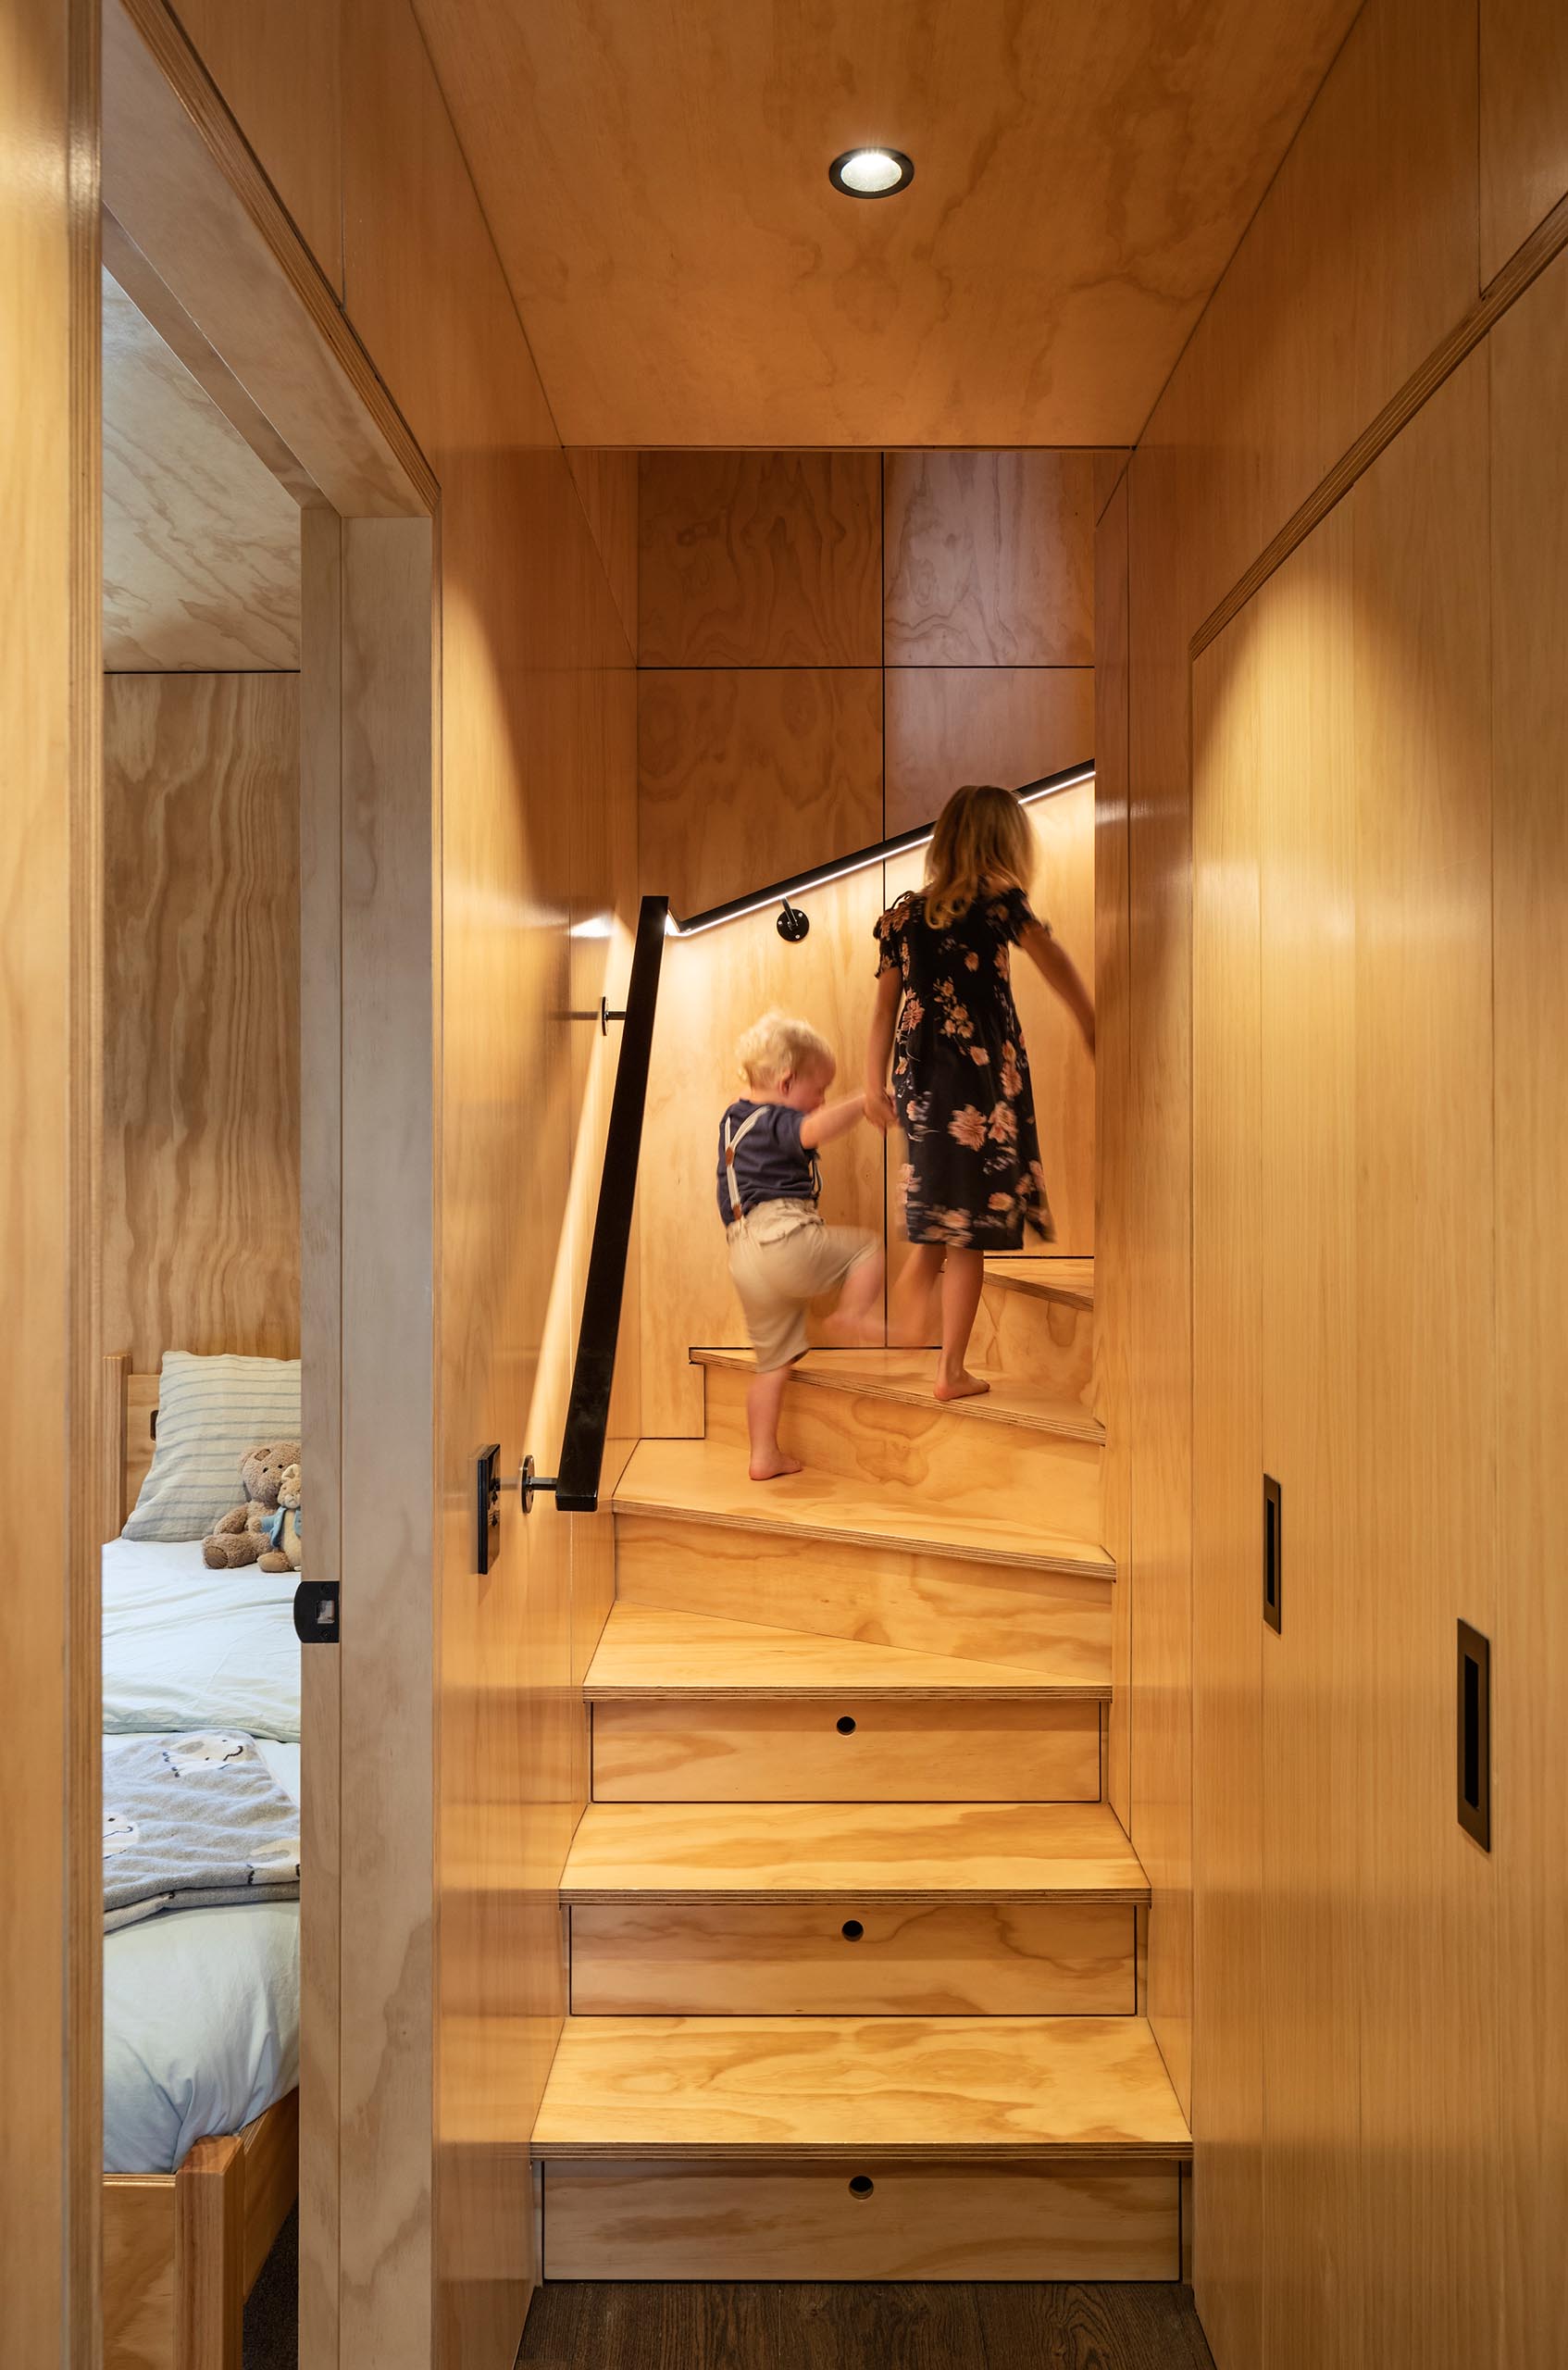 Wood stairs lead to the upper floor of the home, while a black handrail has hidden lighting to guide the way.